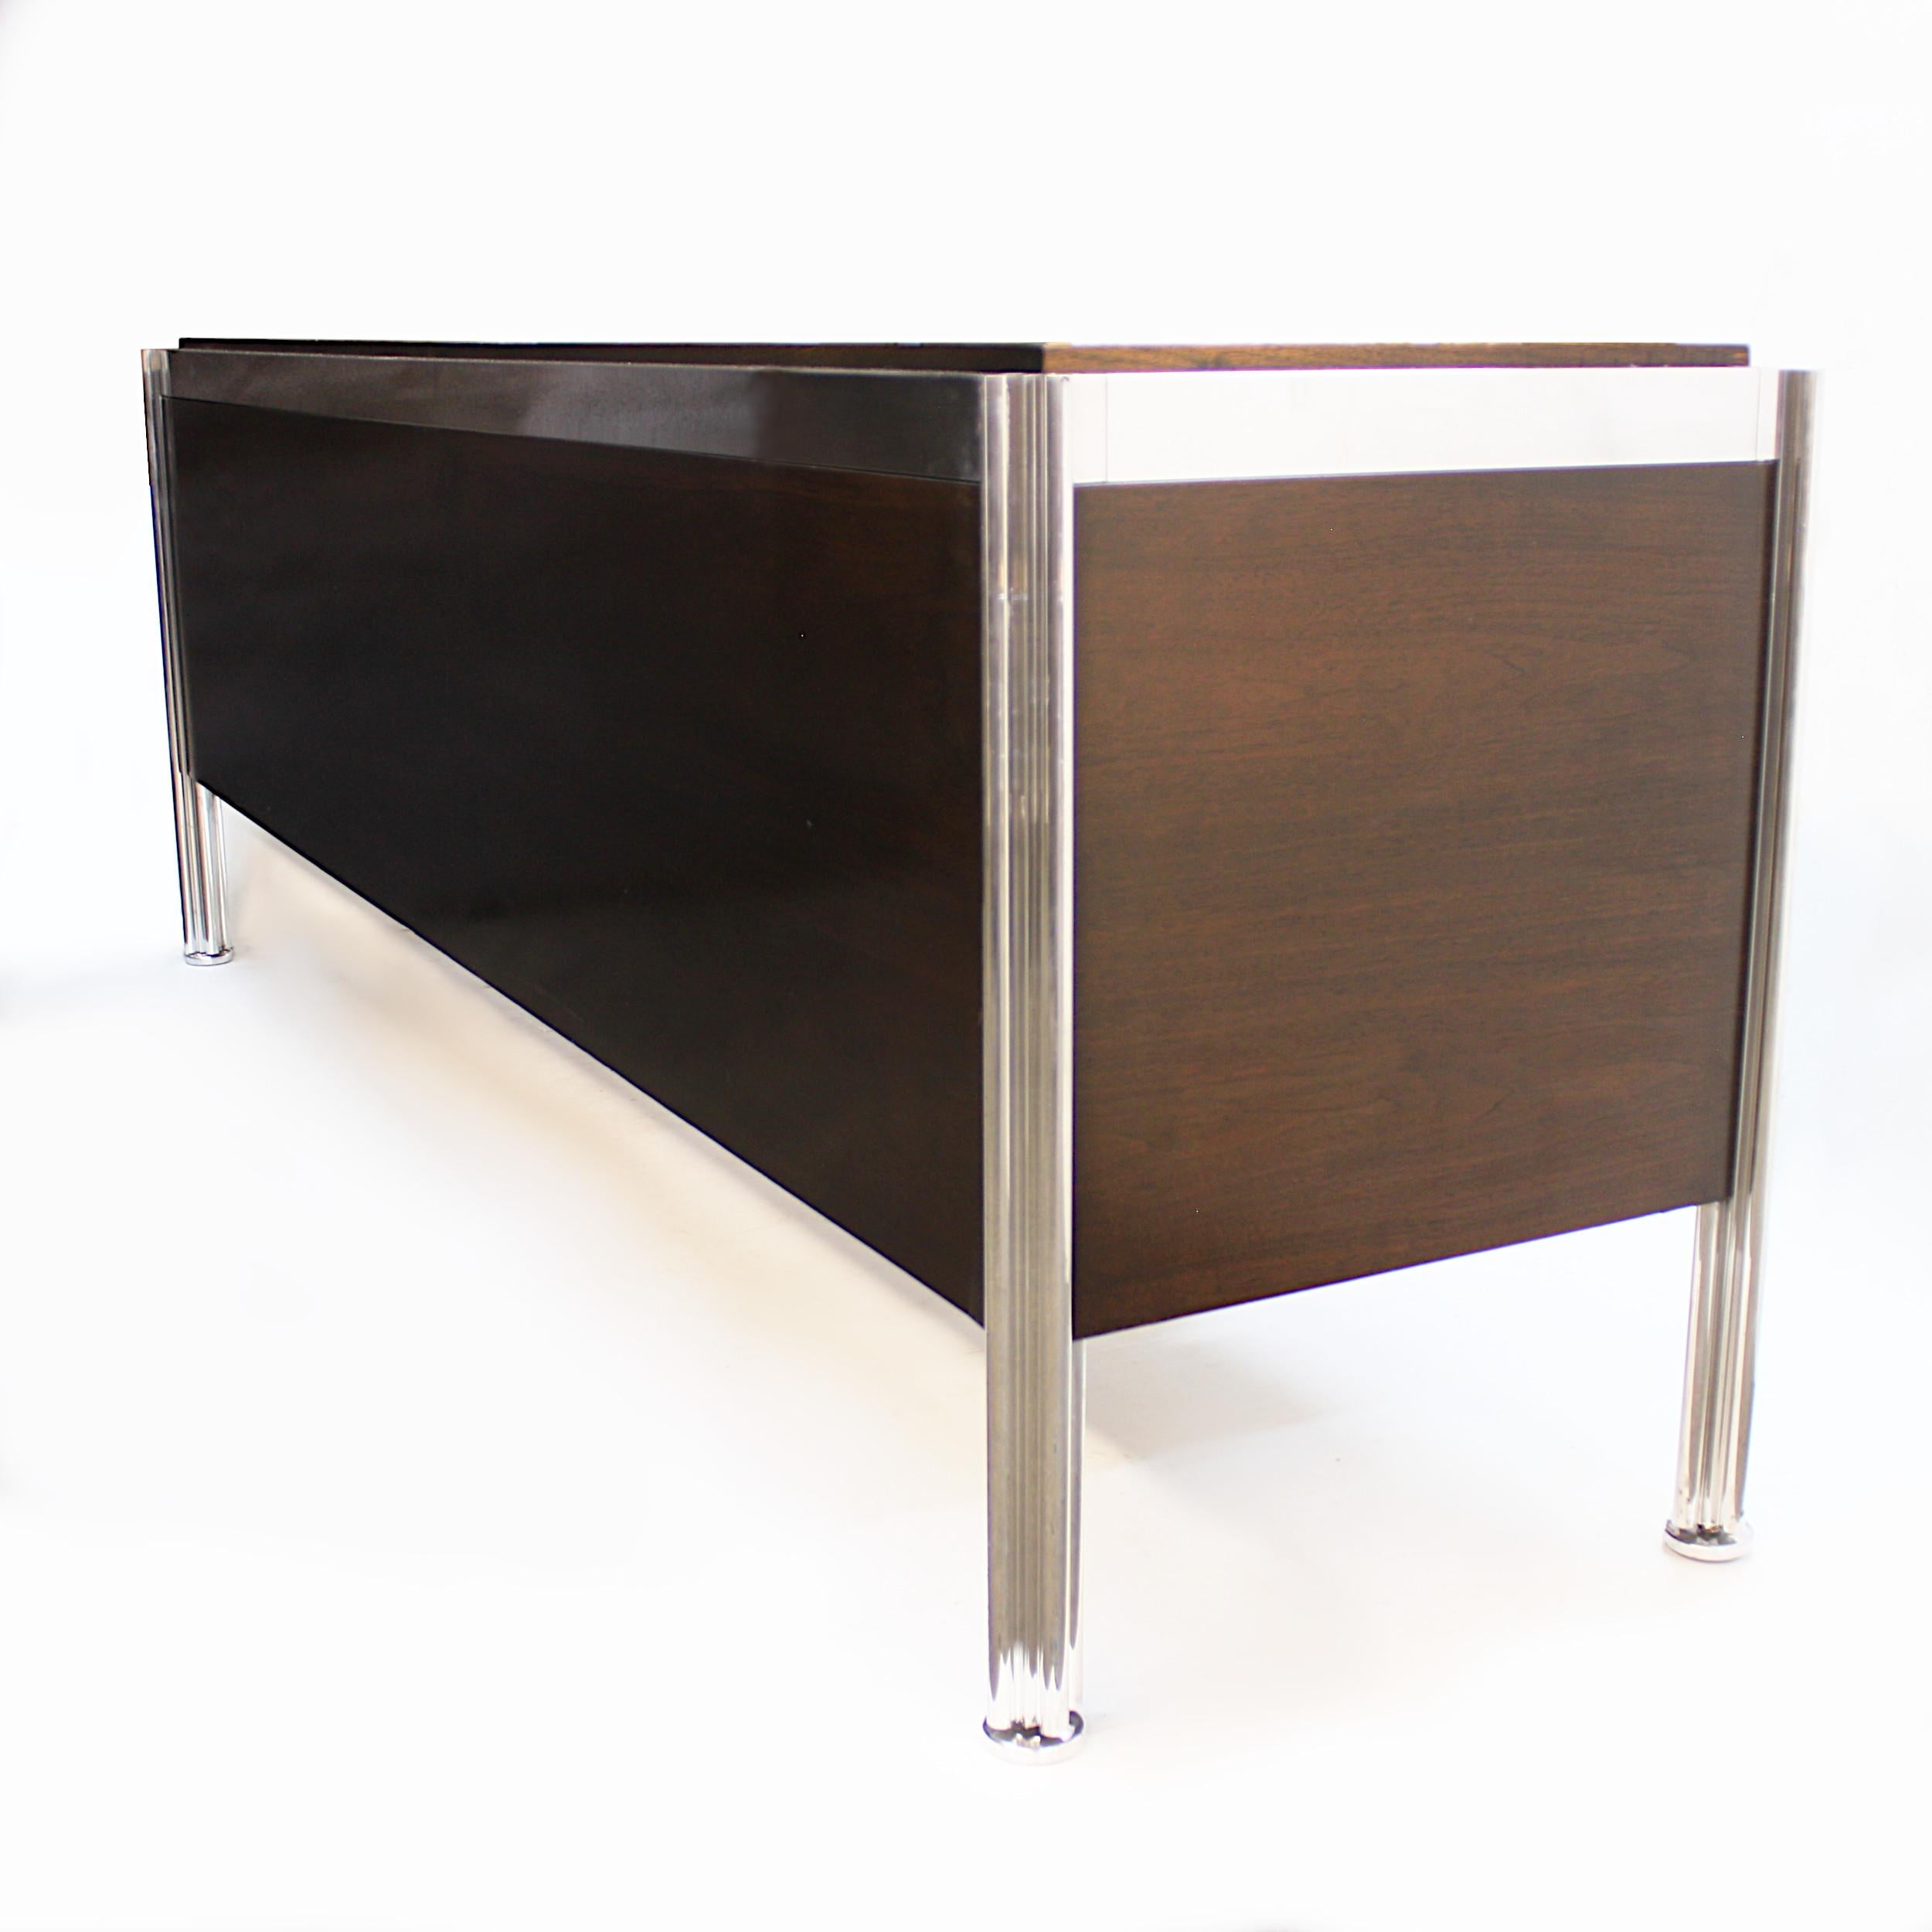 Cast 1970s Mid-Century Modern Walnut and Aluminum Credenza by George Ciancimino